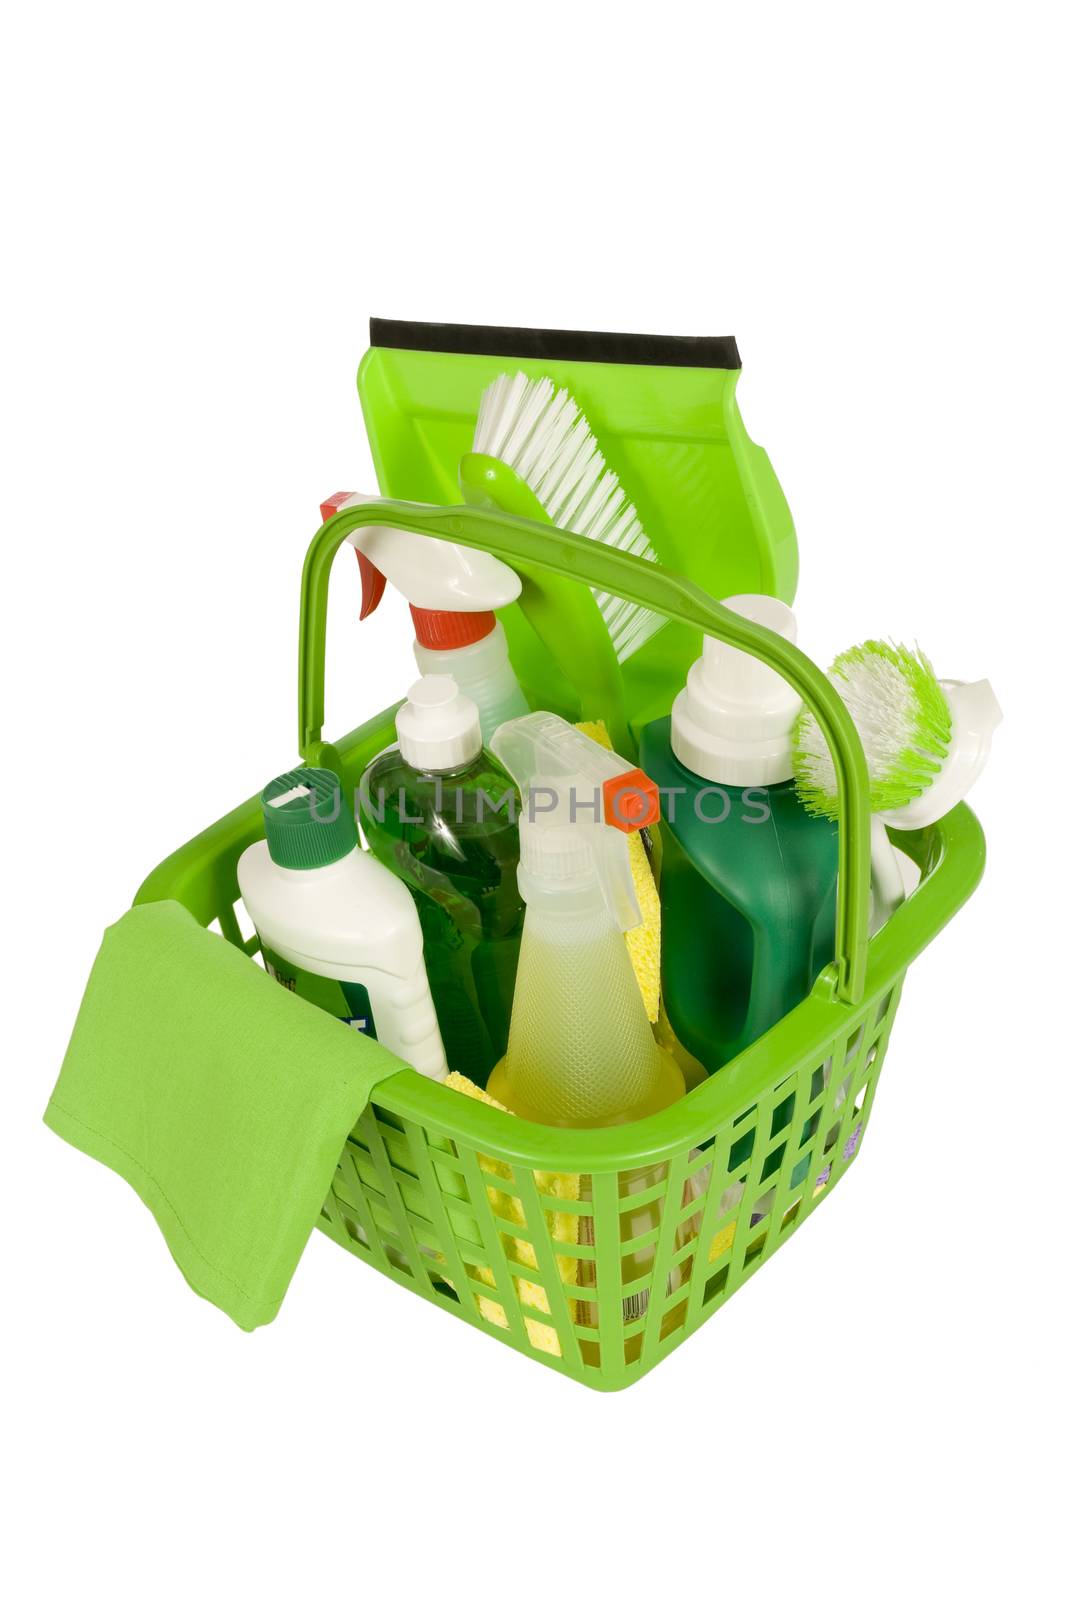 Environmentally safe green cleaning supplies.  Isolated on white.